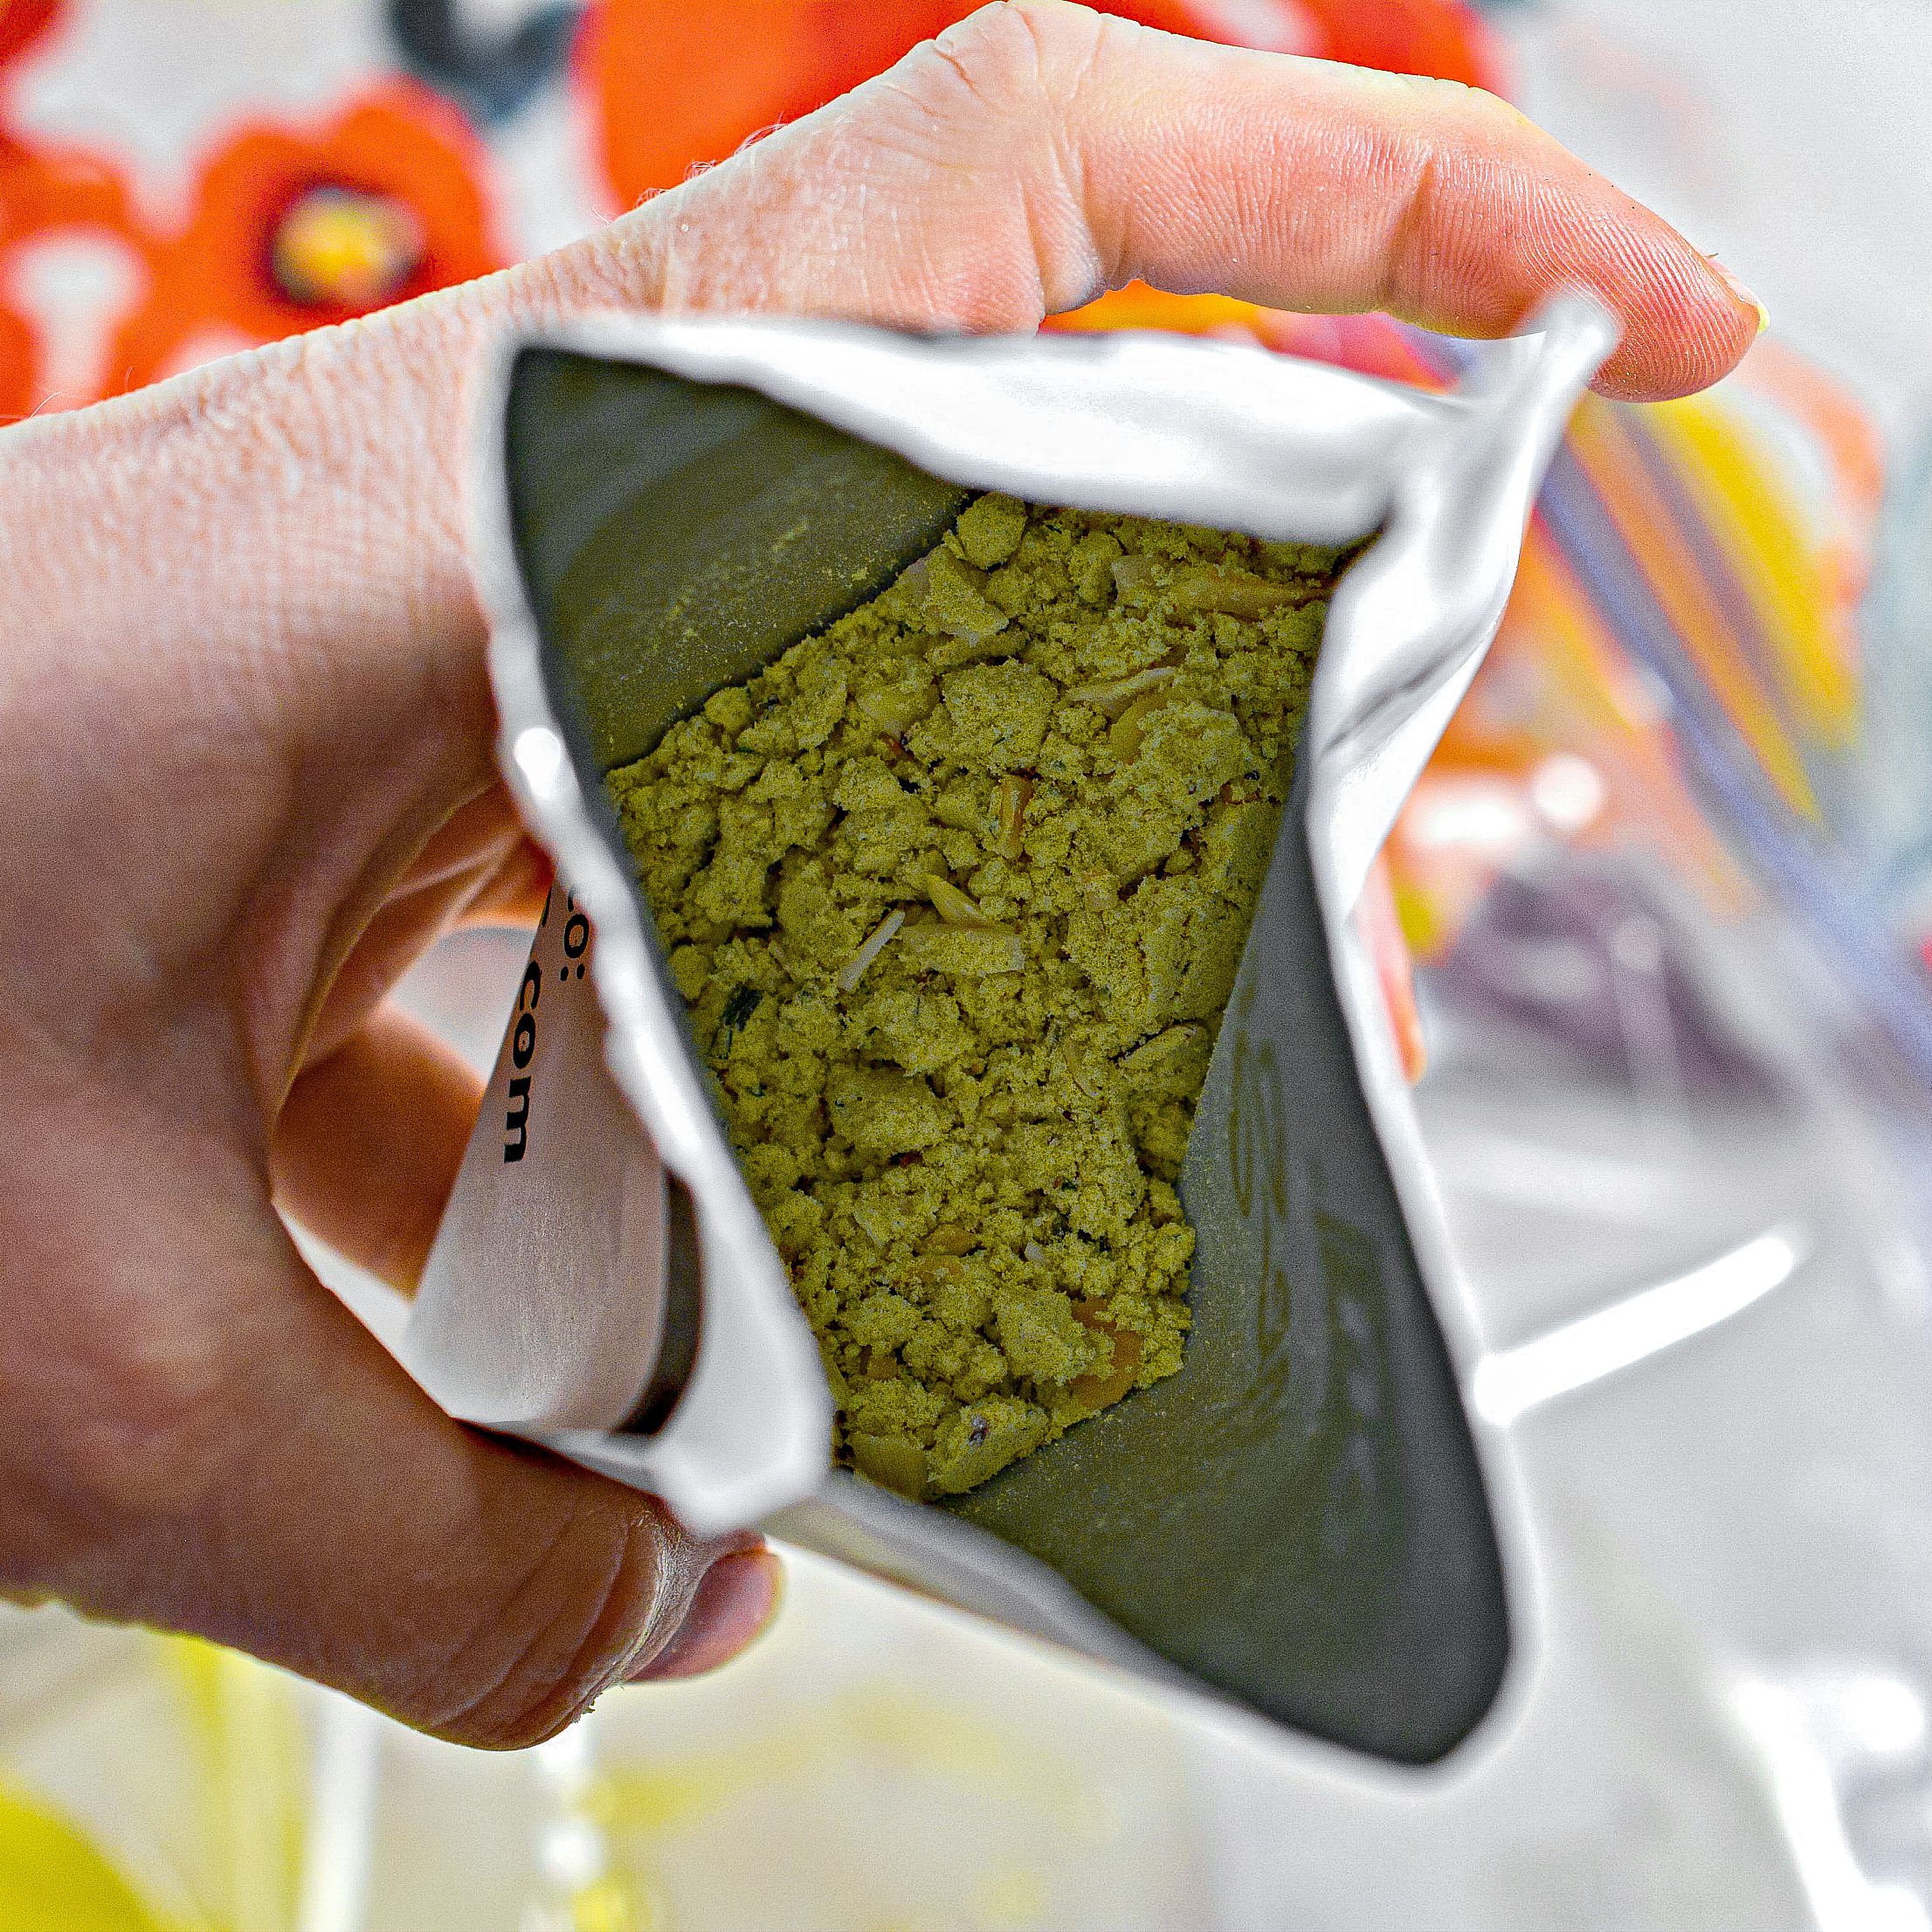 Add all of the ingredients to a large Ziploc bag and toss to coat well.